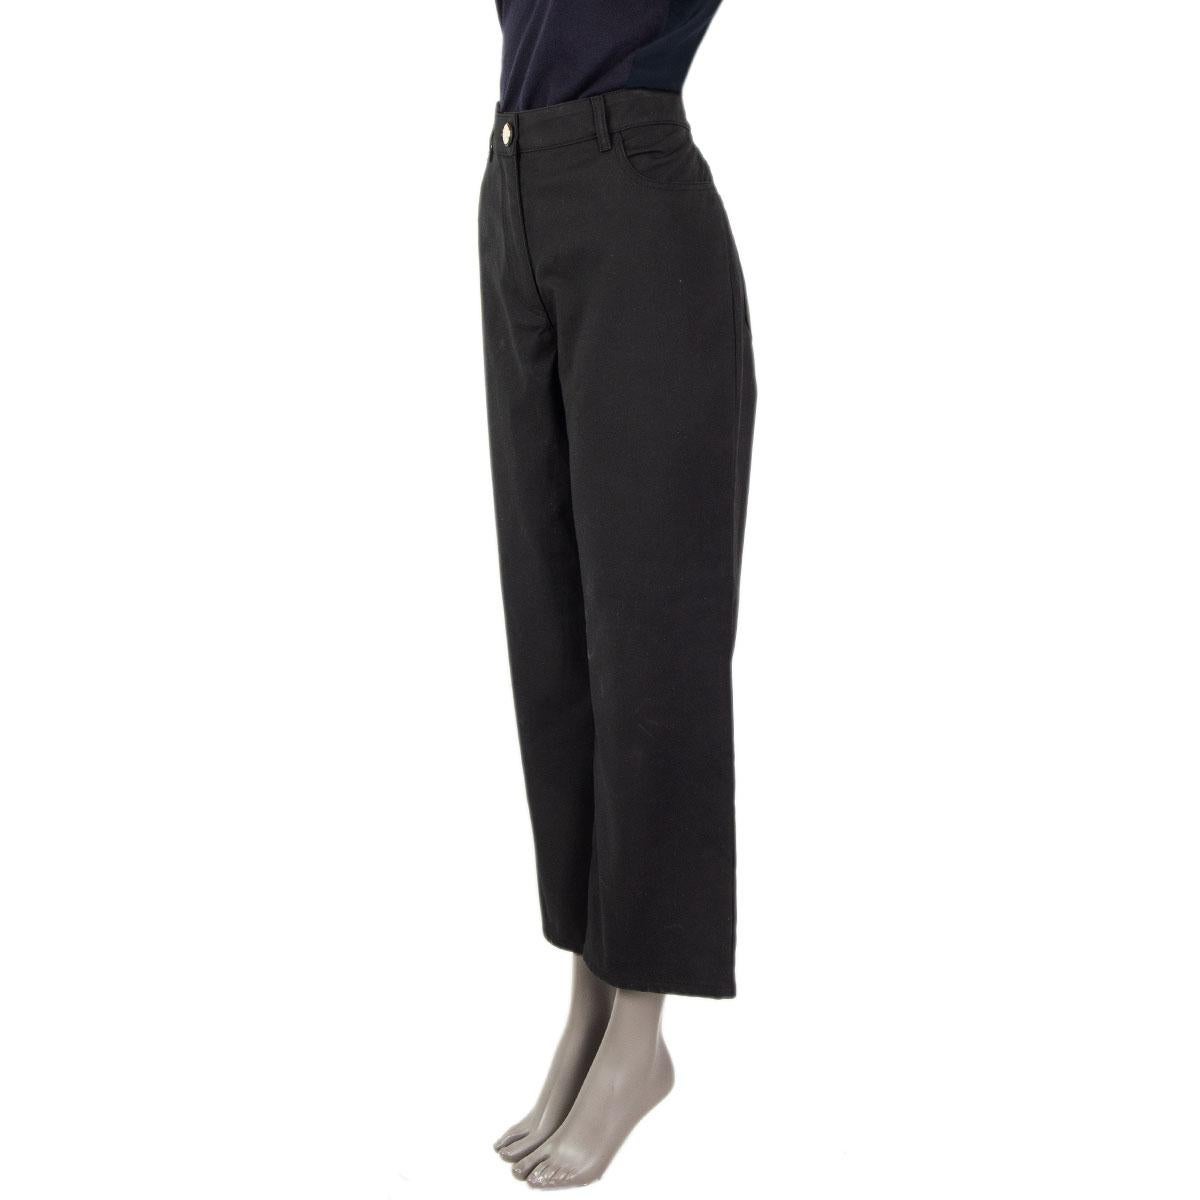 100% authentic Chanel wide-leg pants in black cotton (100%) with two side pockets in the front. Closes with a concealed zipper and a metallic button in the front. Includes one additional button. Have been worn and are in excellent